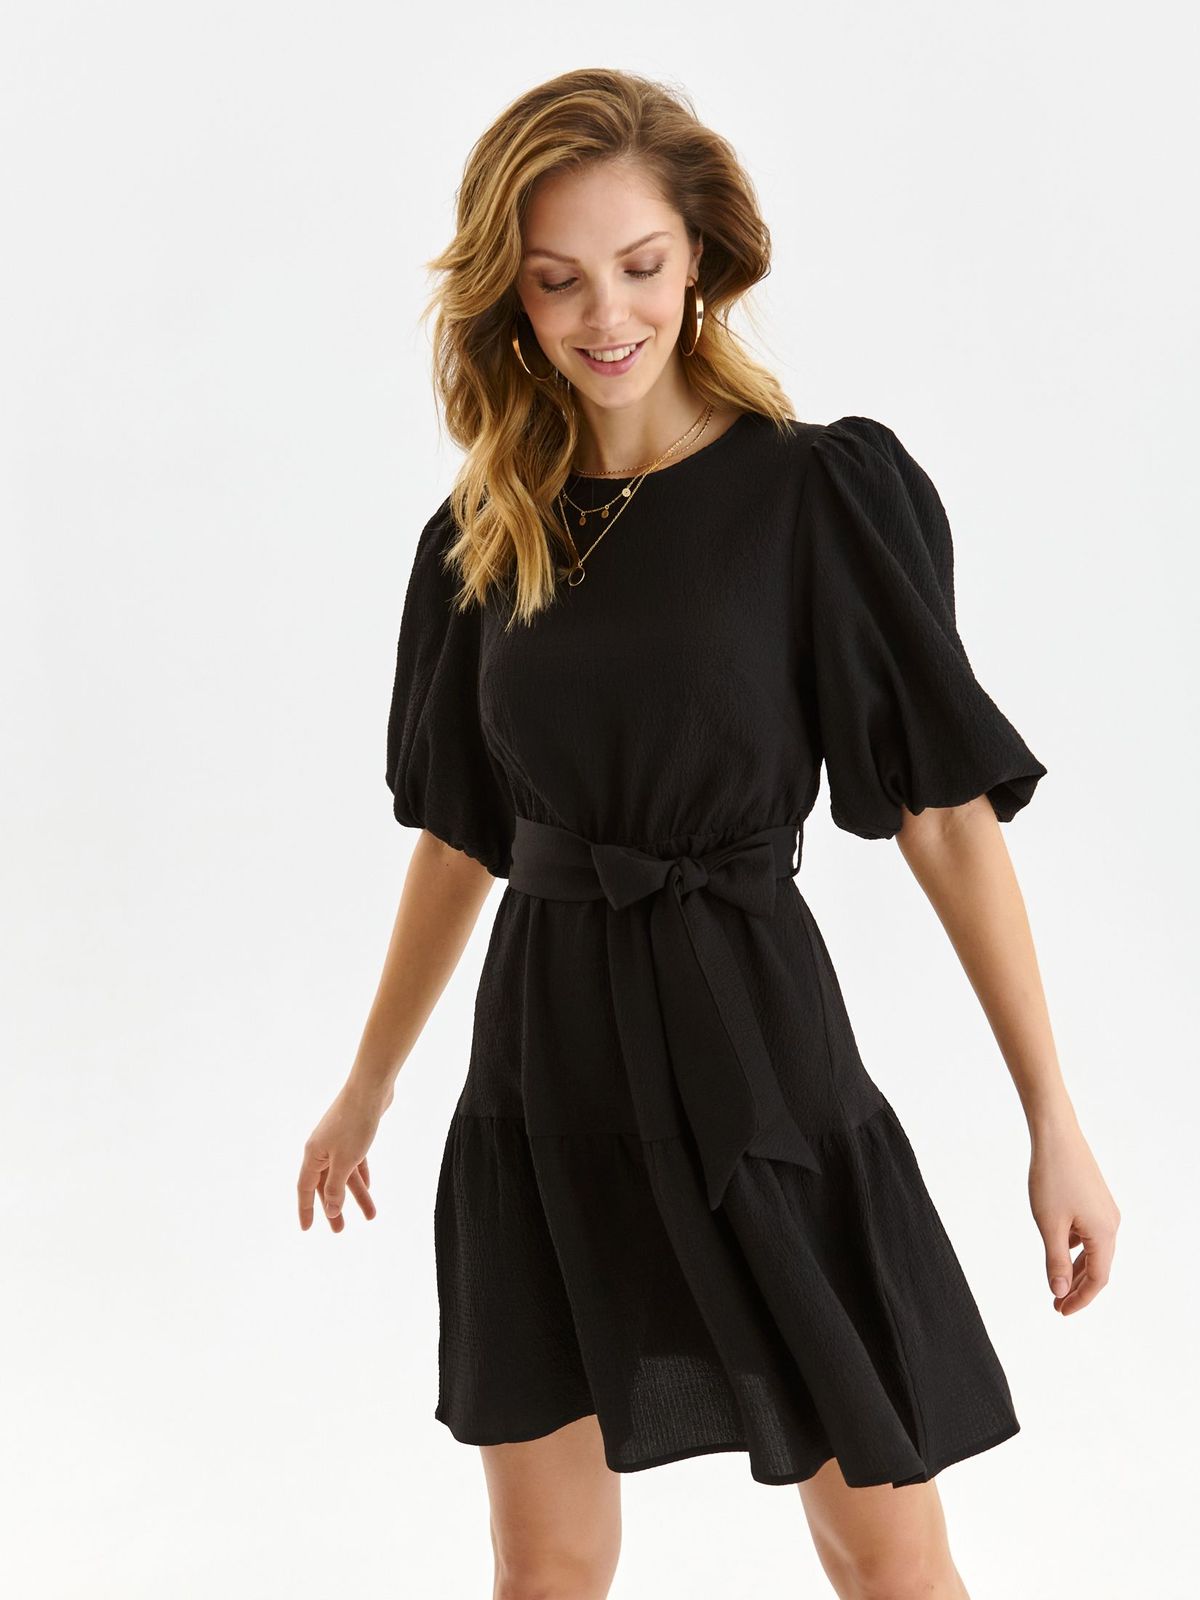 Black dress short cut cloche with elastic waist thin fabric with puffed sleeves